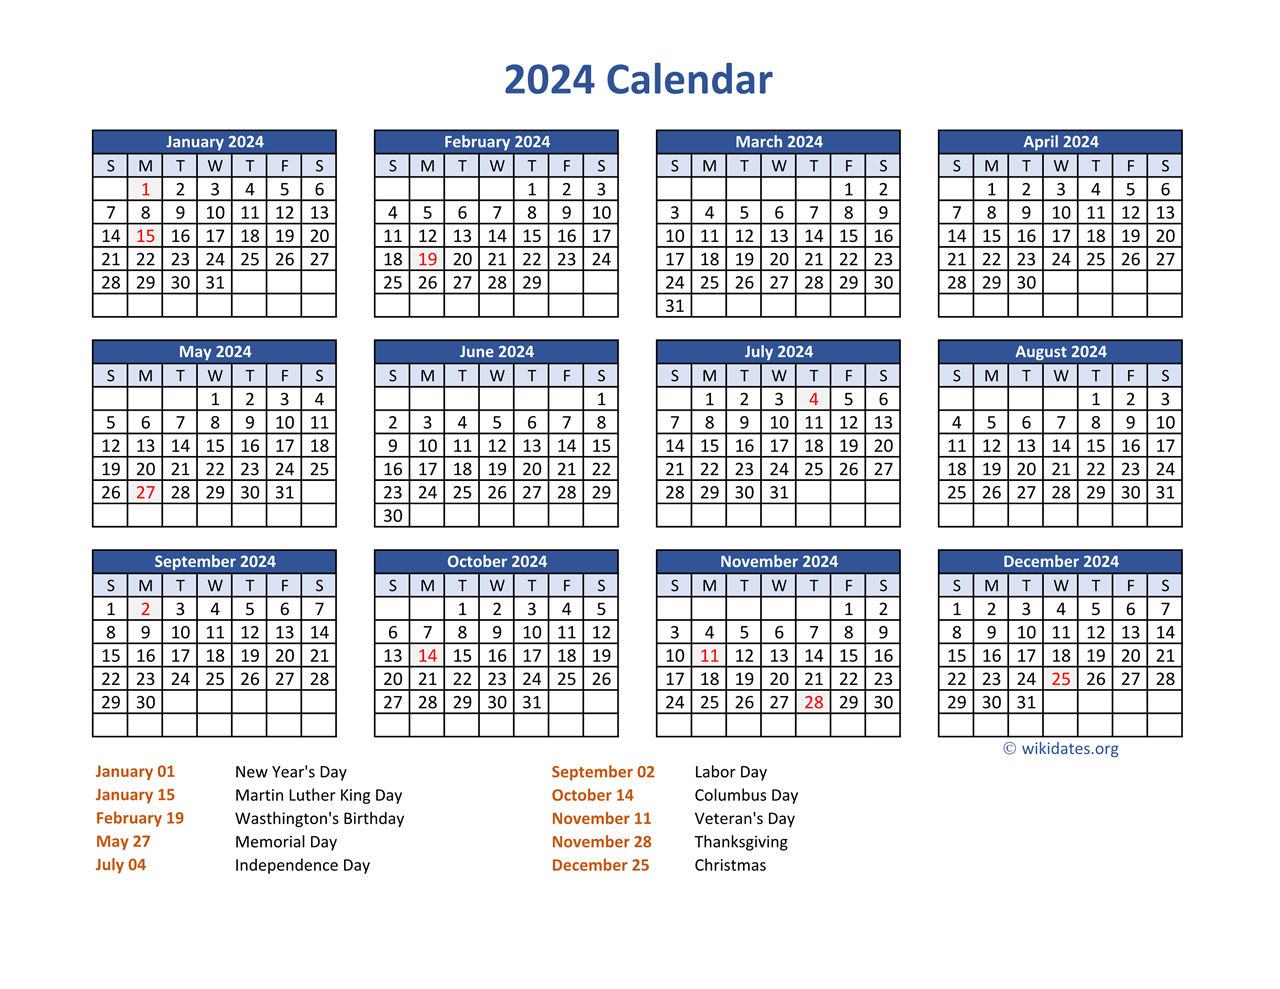 Pdf Calendar 2024 With Federal Holidays | Wikidates for Calendar With Holidays 2024 Printable